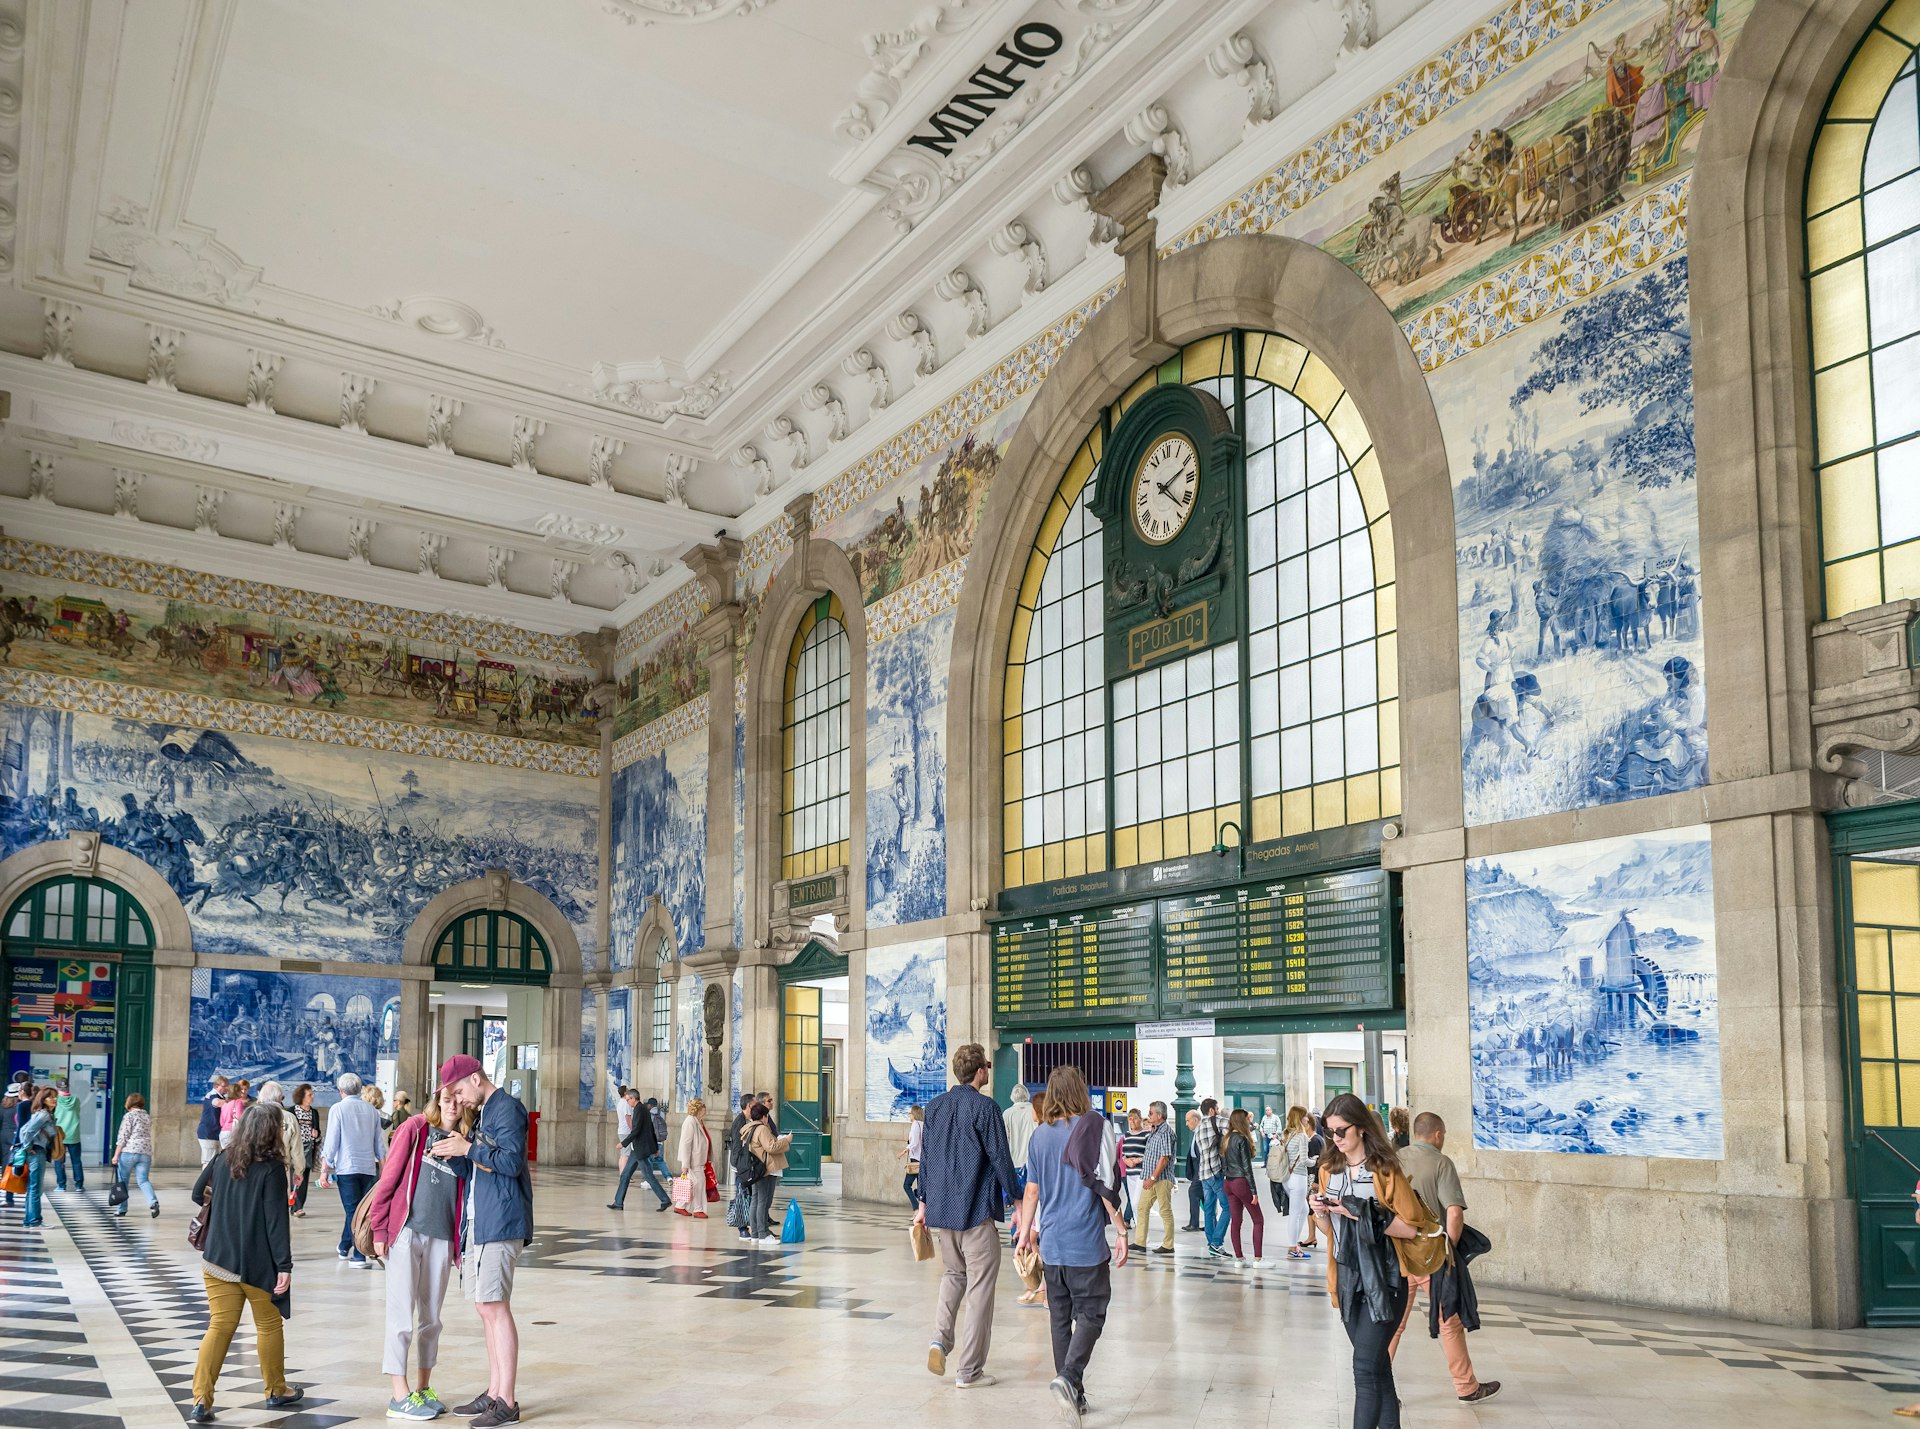 A station concourse busy with people. Many are stopping to look at the intricate blue-and-white tiles that decorate the walls